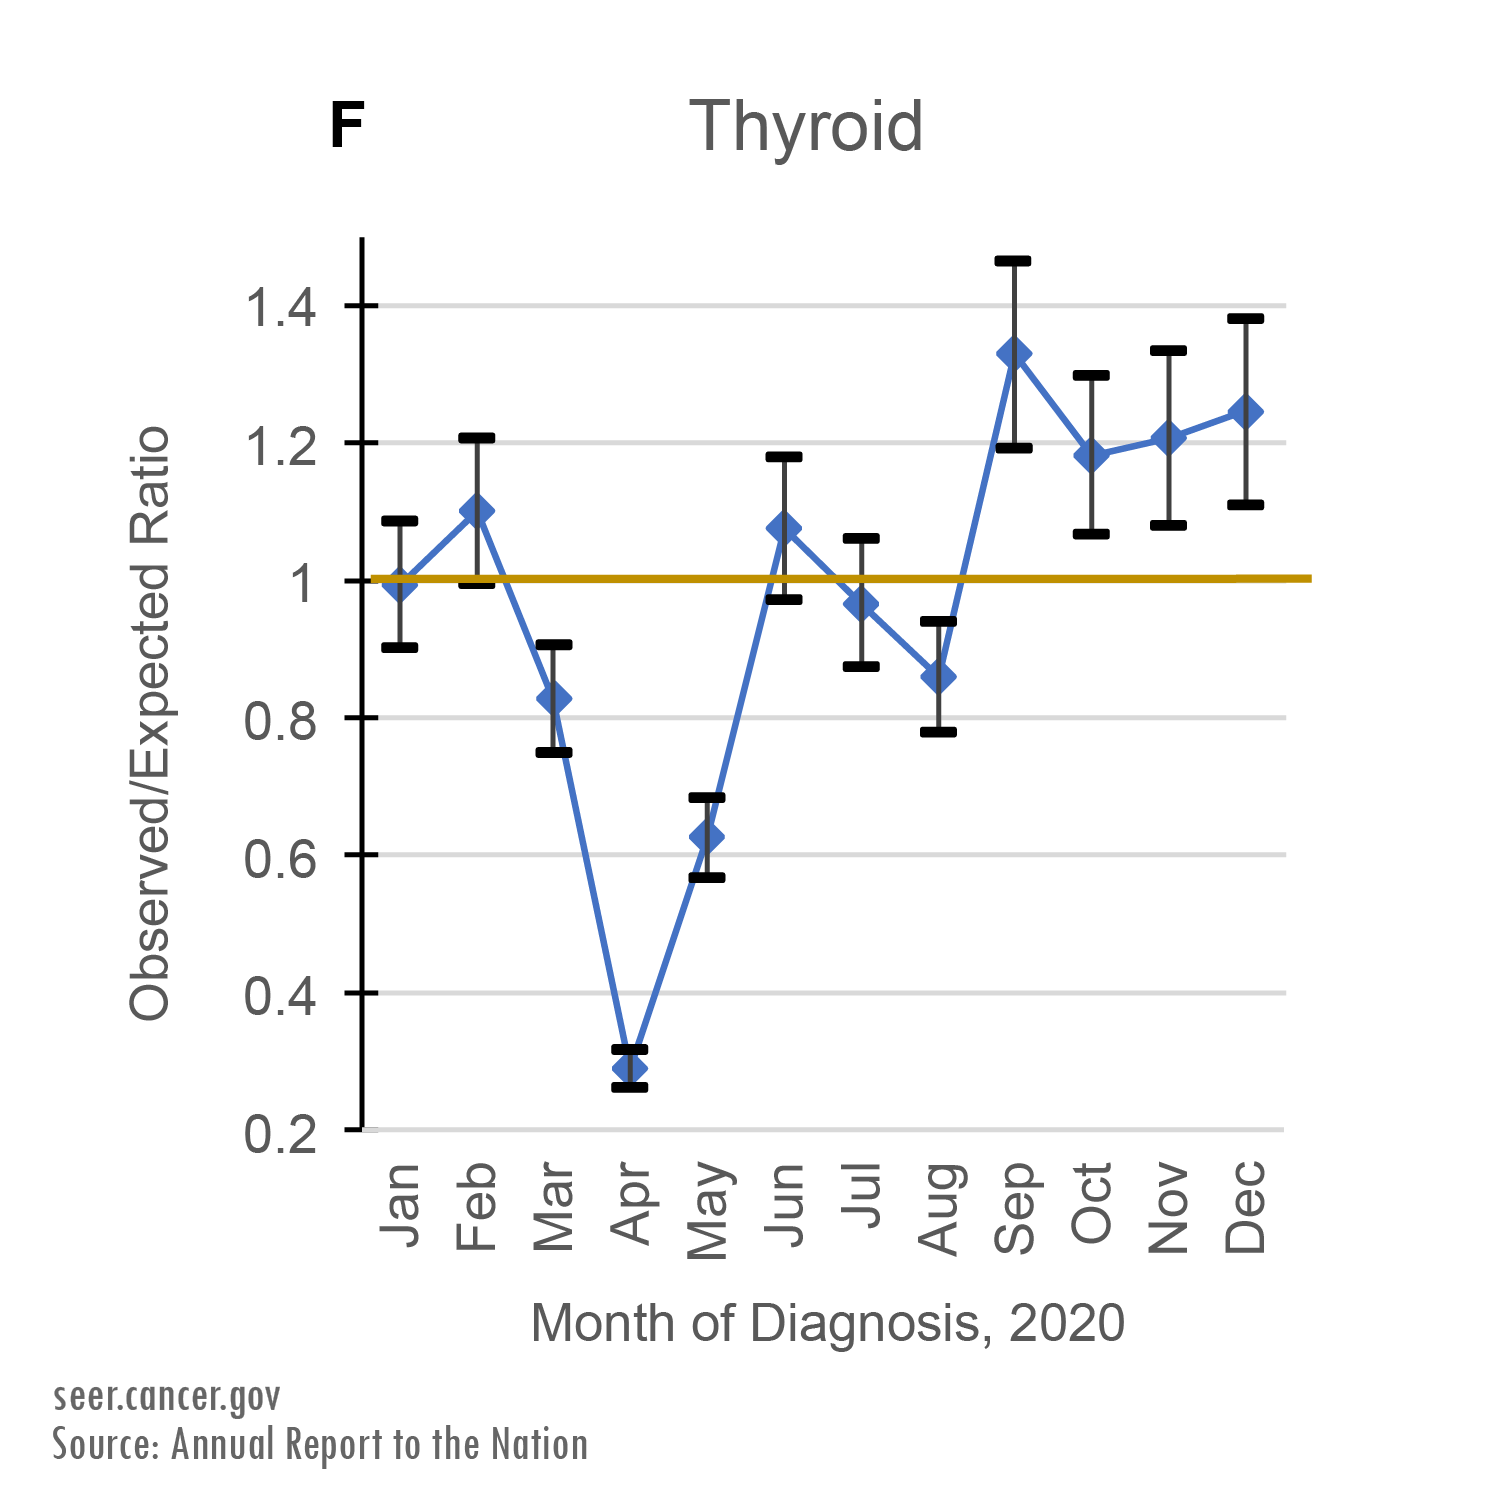 Observed/Expected Ratio of Thyroid cancer diagnoses by Month of Diagnosis, 2020